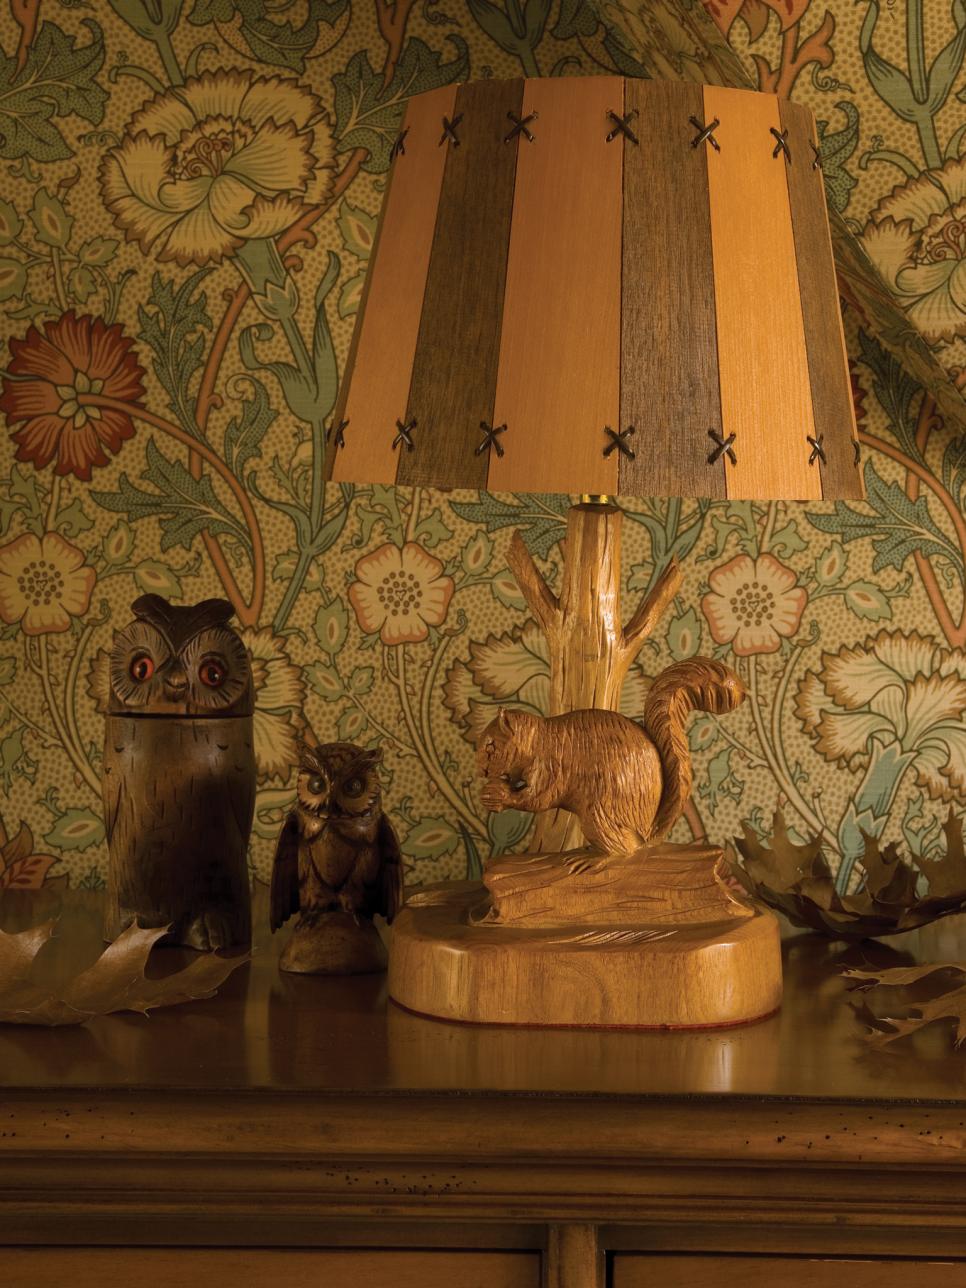 Carved Squirrel Lamp and Owl Humidor in Floral Room